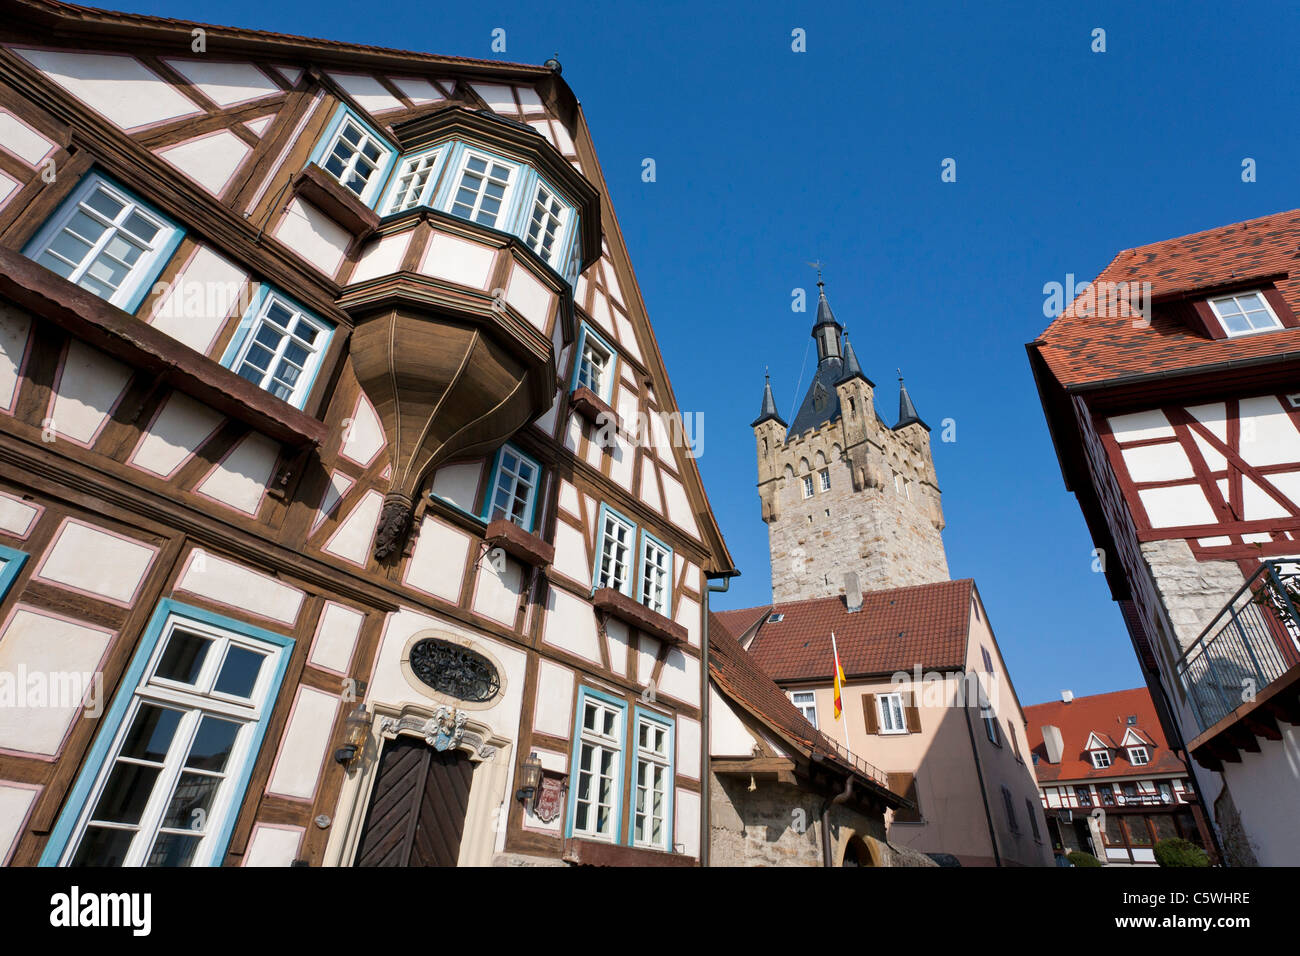 Germany Bad Wimpfen Historical mayor Elsaesser building Blauer Turm building and frame houses in historic old town Stock Photo